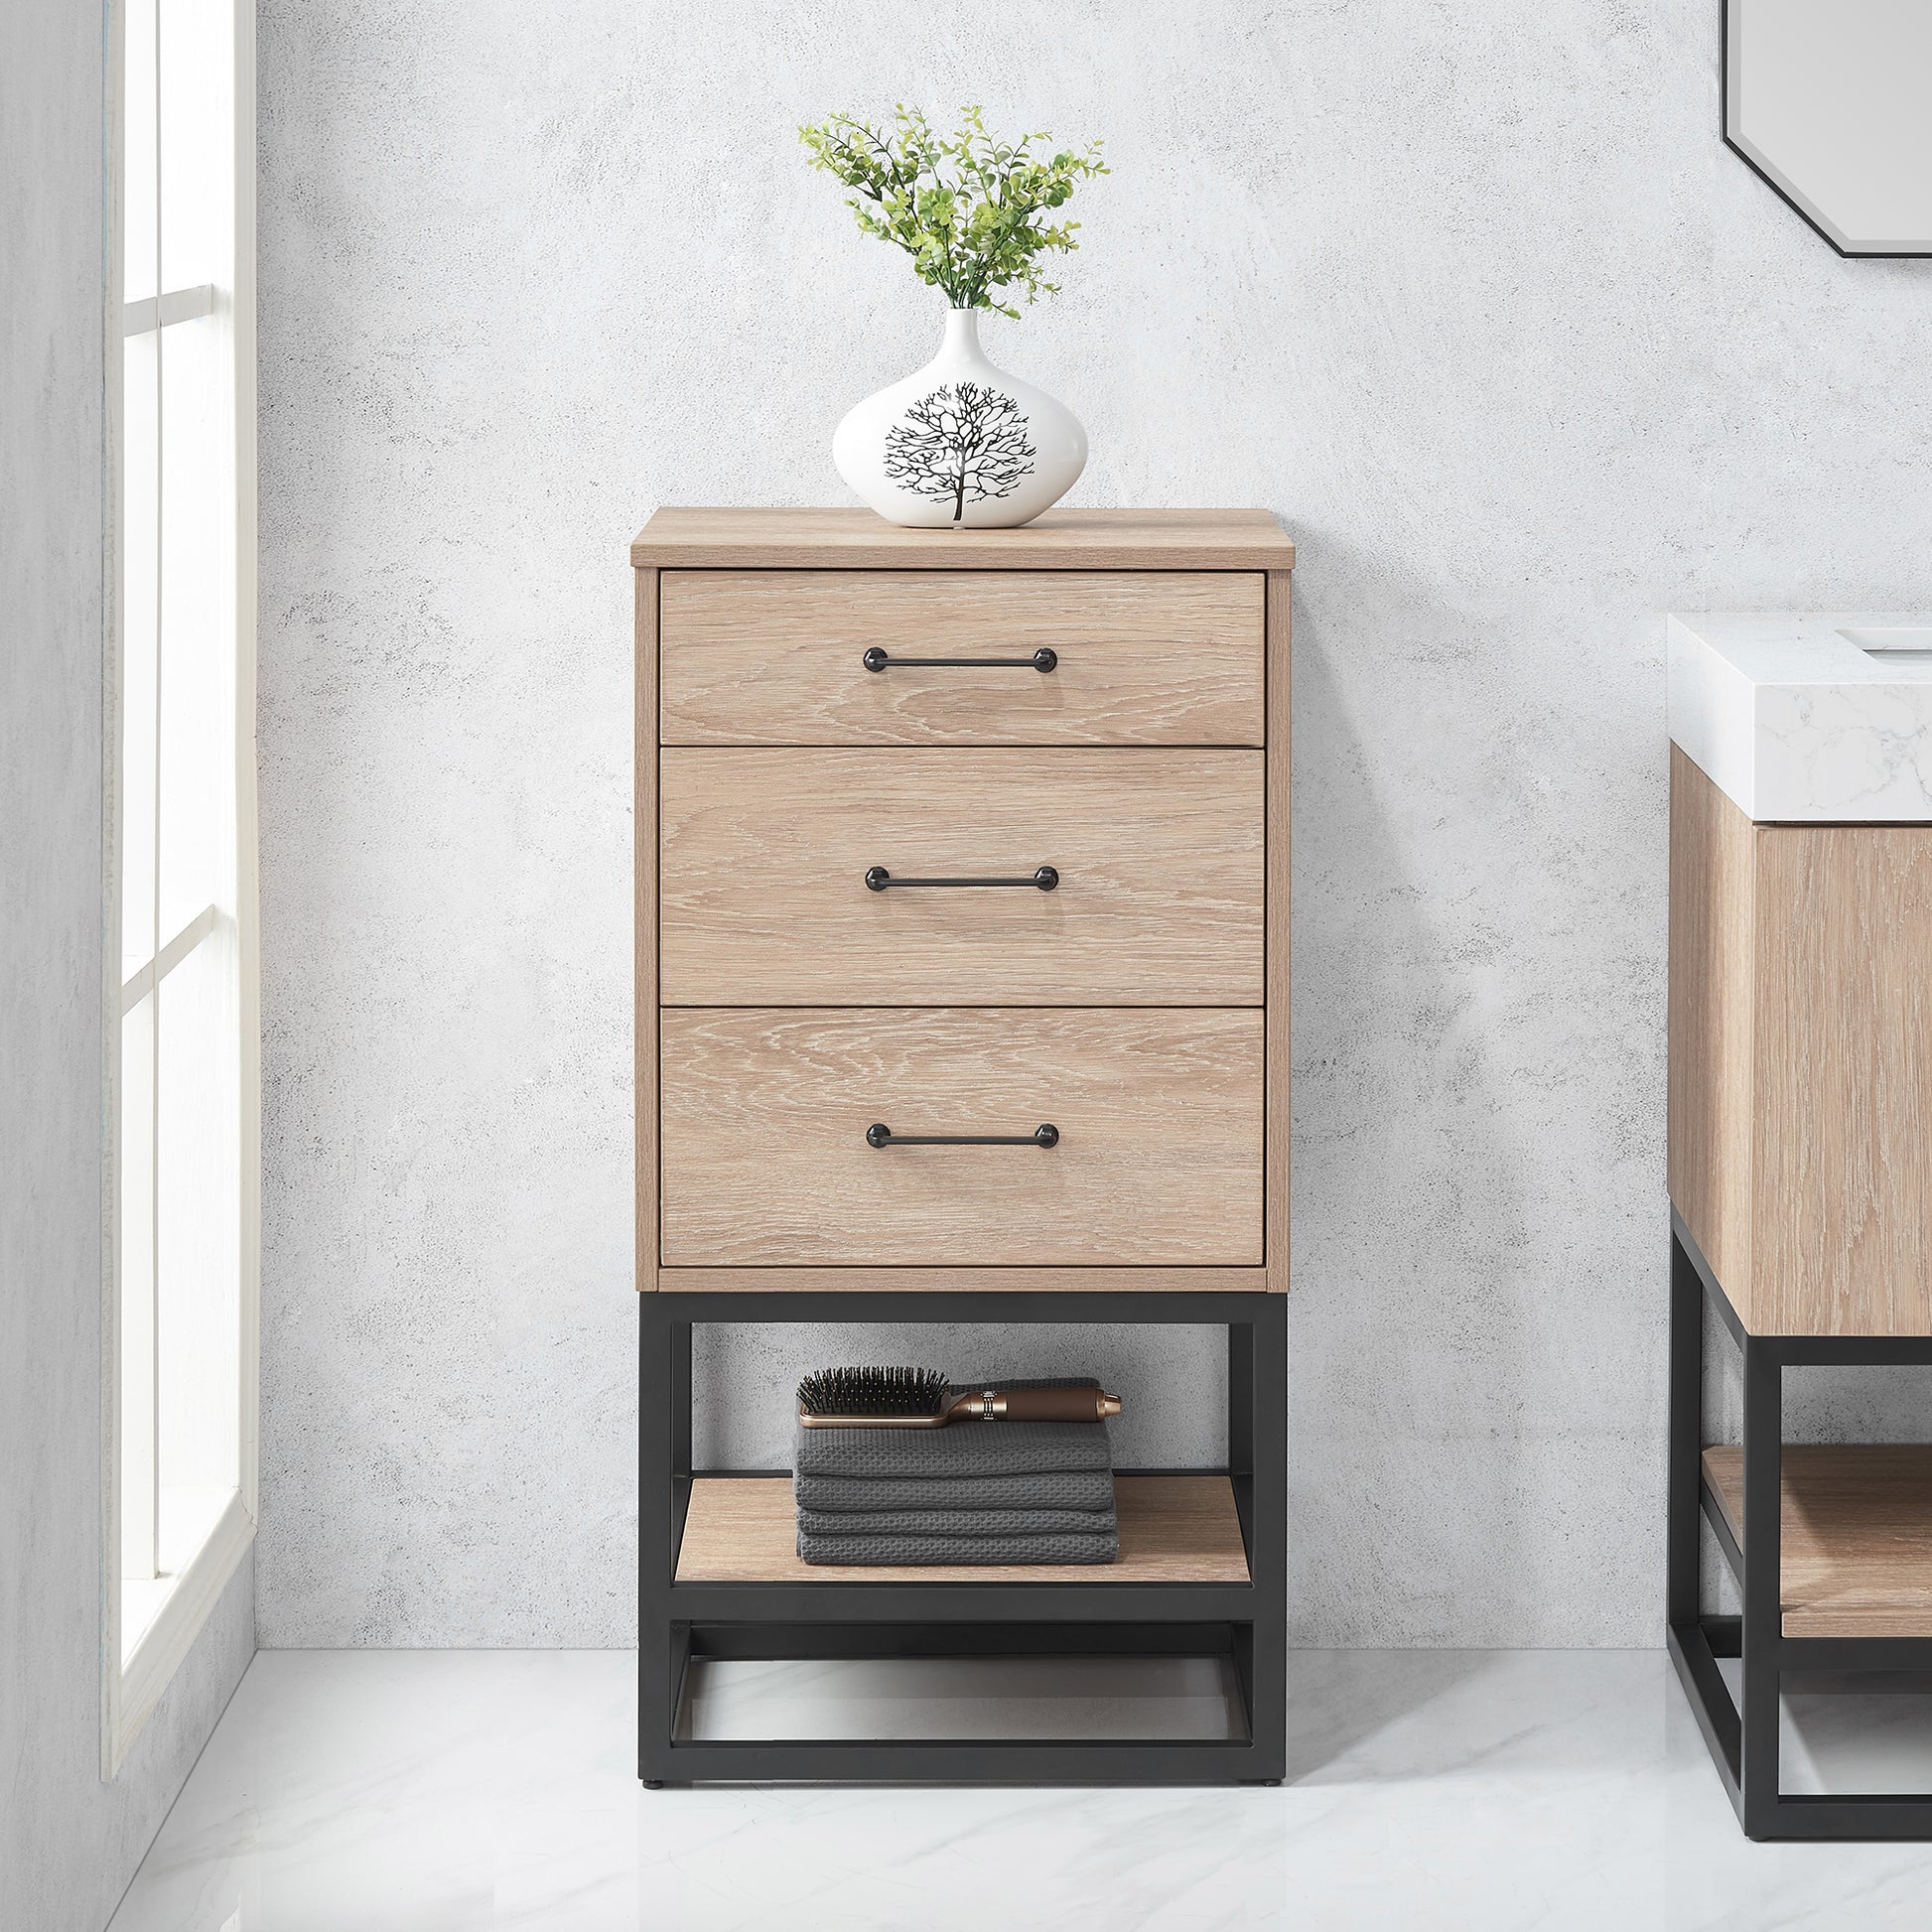 
  
  Alistair 19.7" Storage Cabinet in North American Oak Finish with 3 Drawers 1 Shelf for Bathroom and Living Room
  
